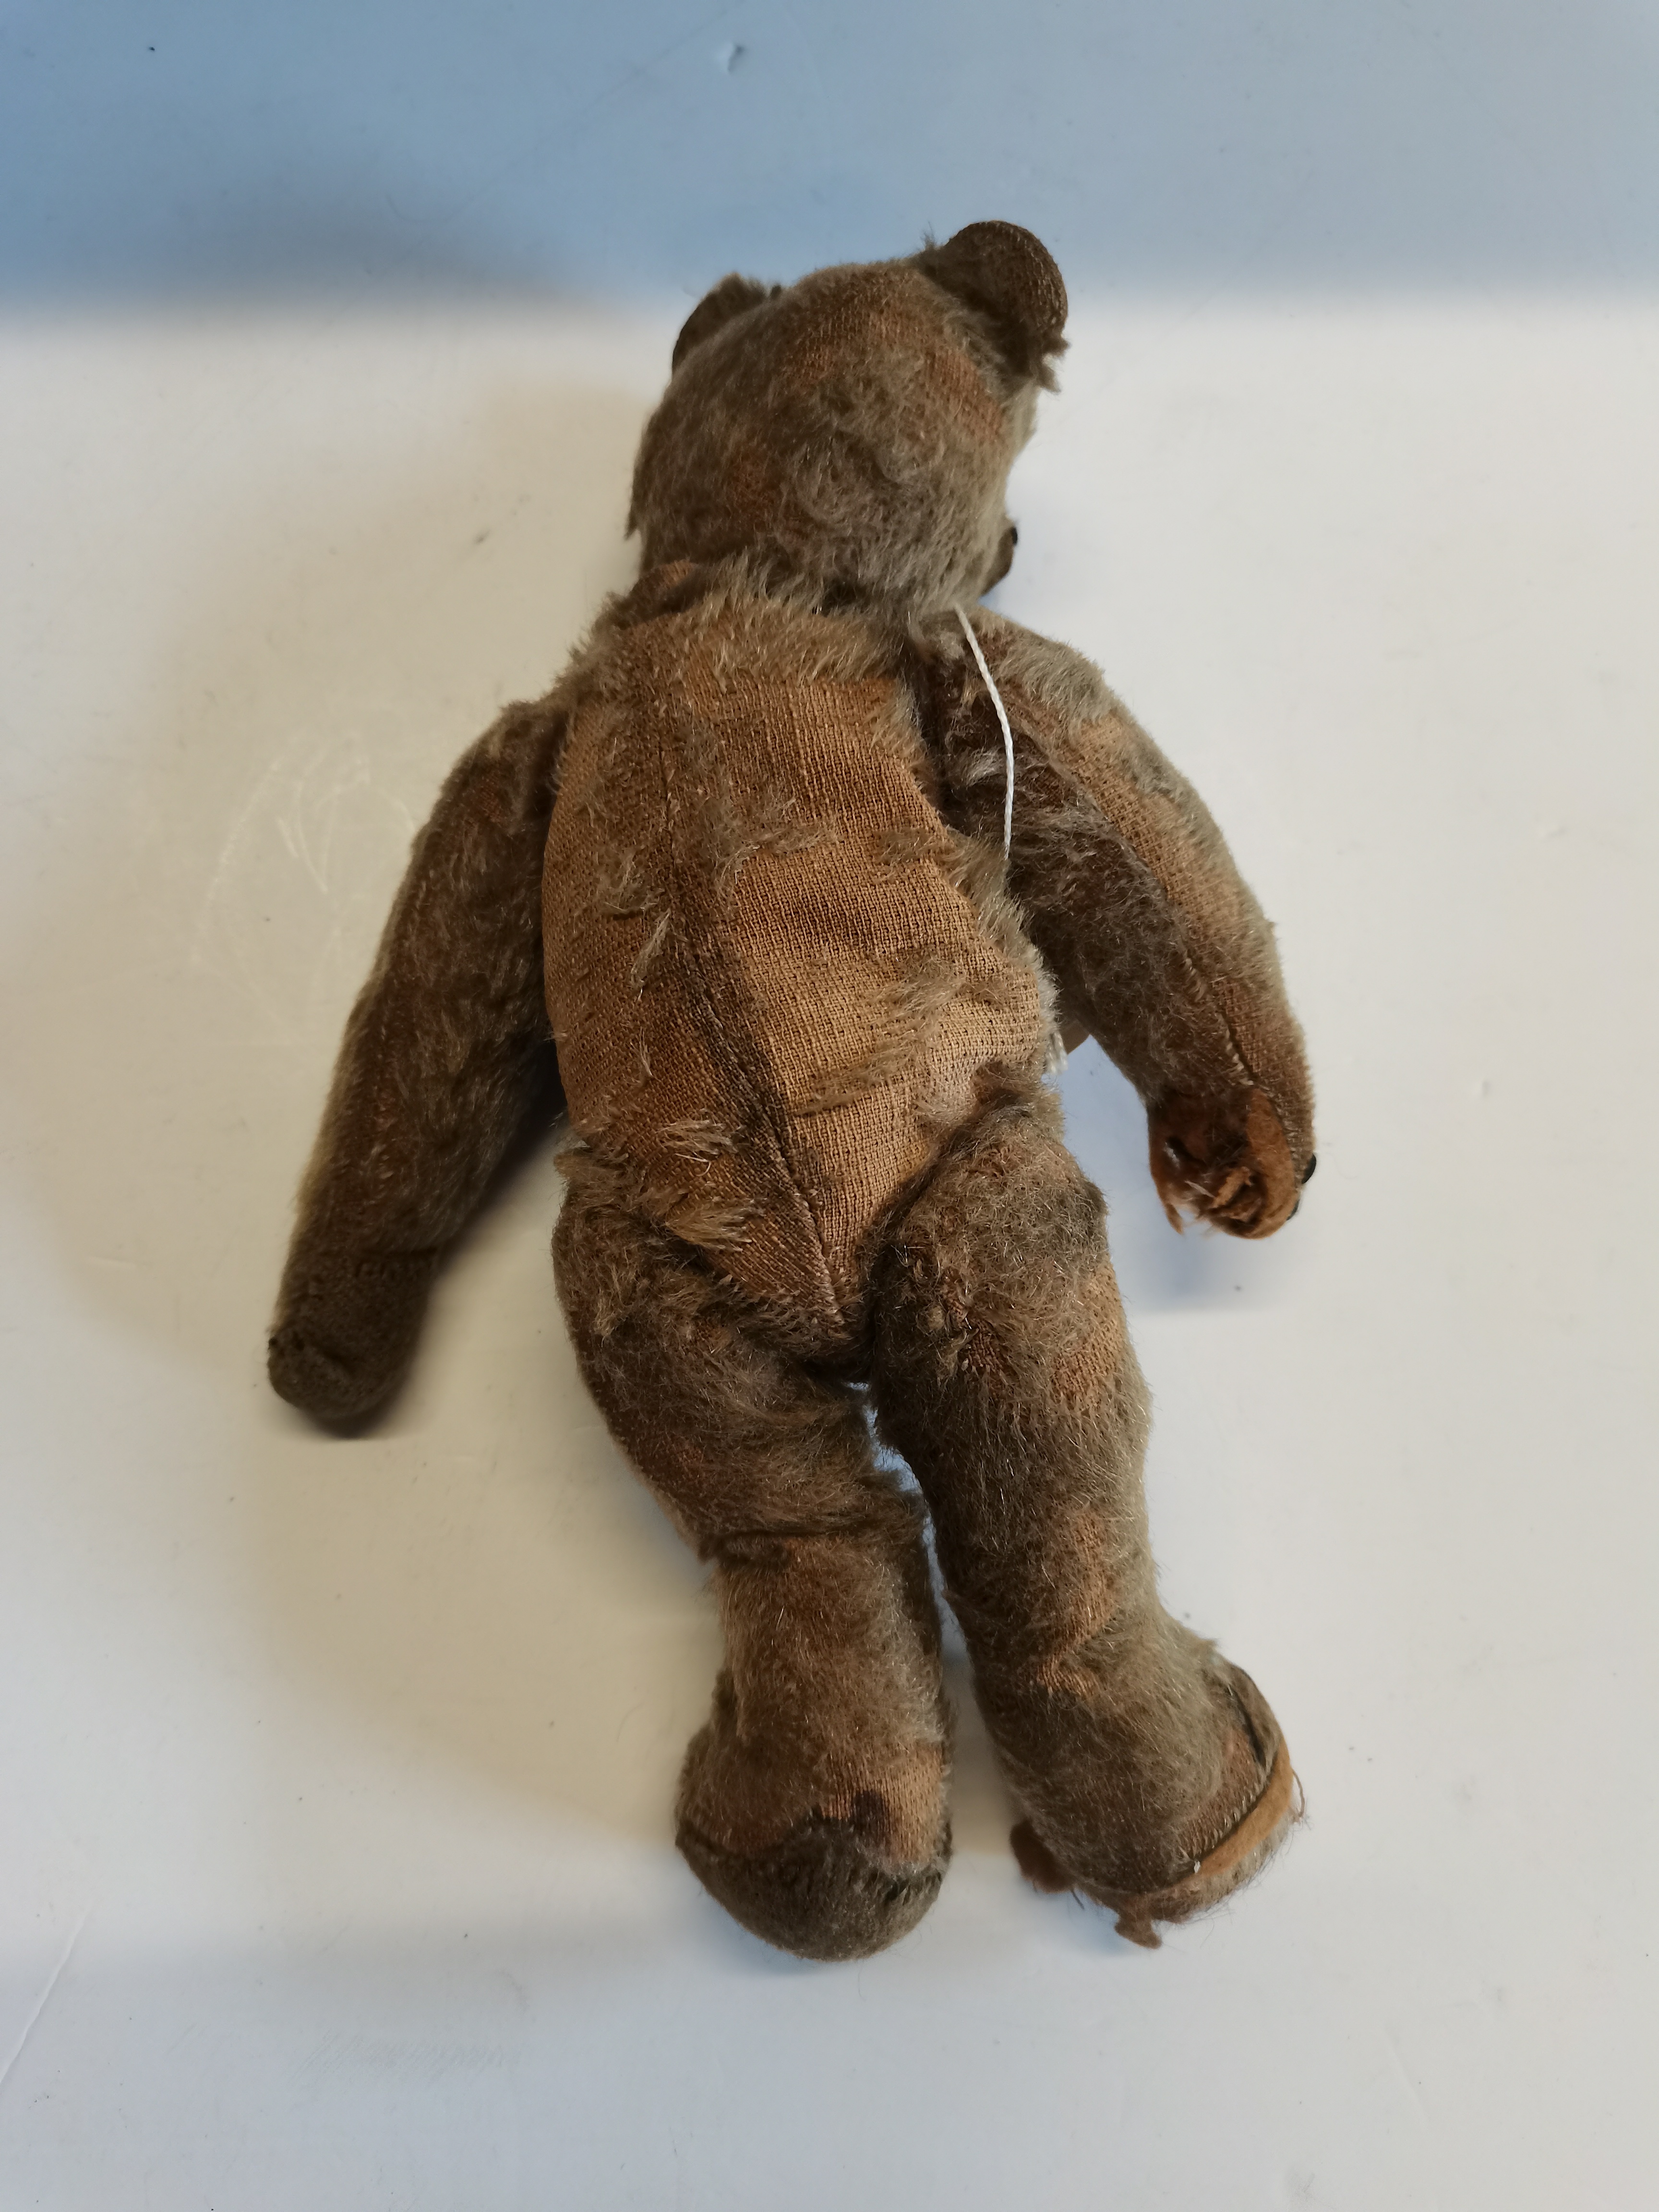 Old Steiff Teddy bear (Missing button) - Image 2 of 2